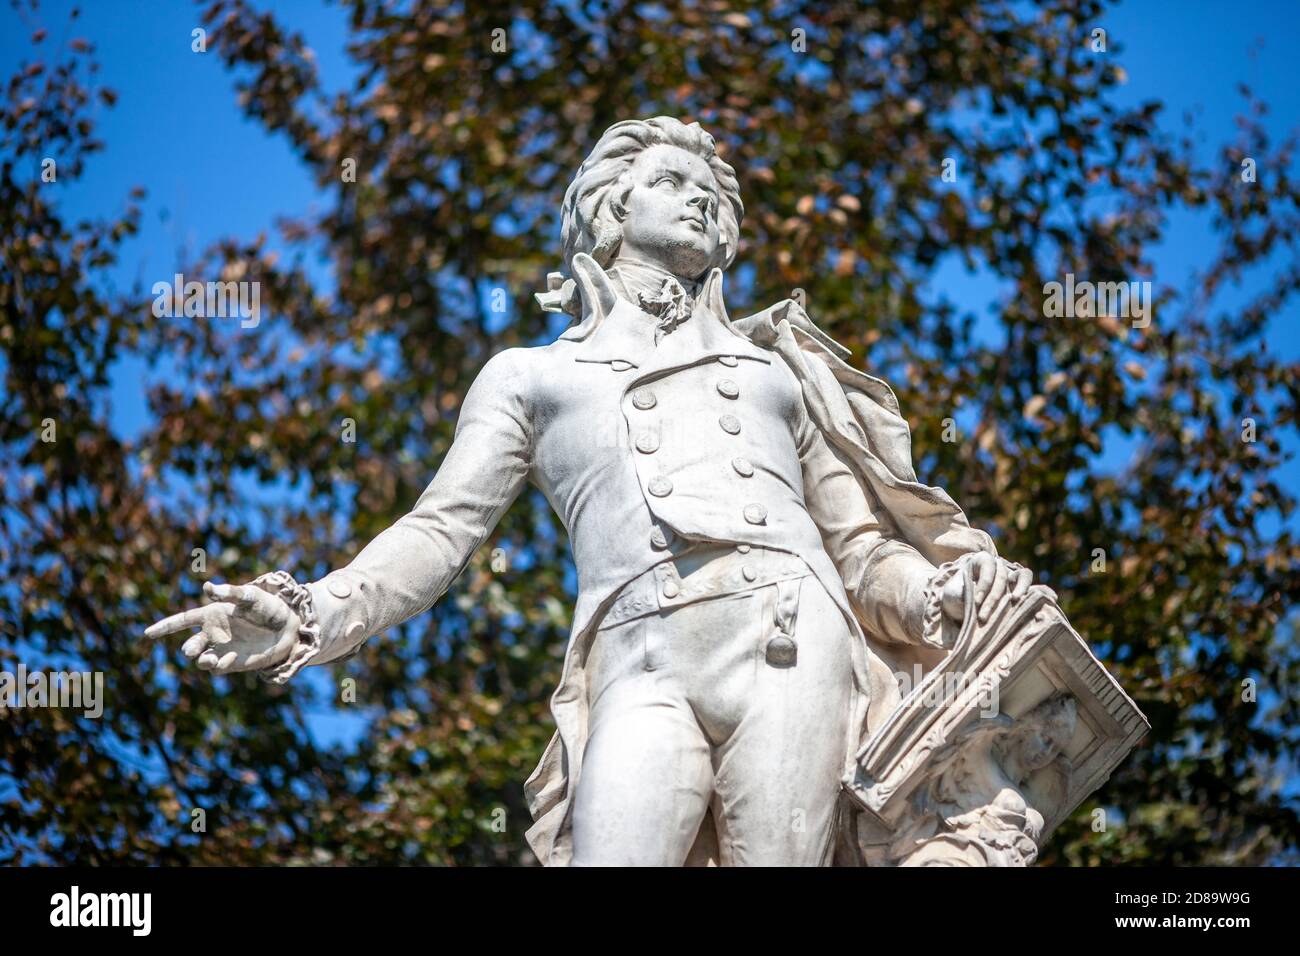 A statue of composer Wolfgang Amadeus Mozart in Vienna, capital of Austria and the country's largest city. Mozart is closely identified with Vienna. Stock Photo